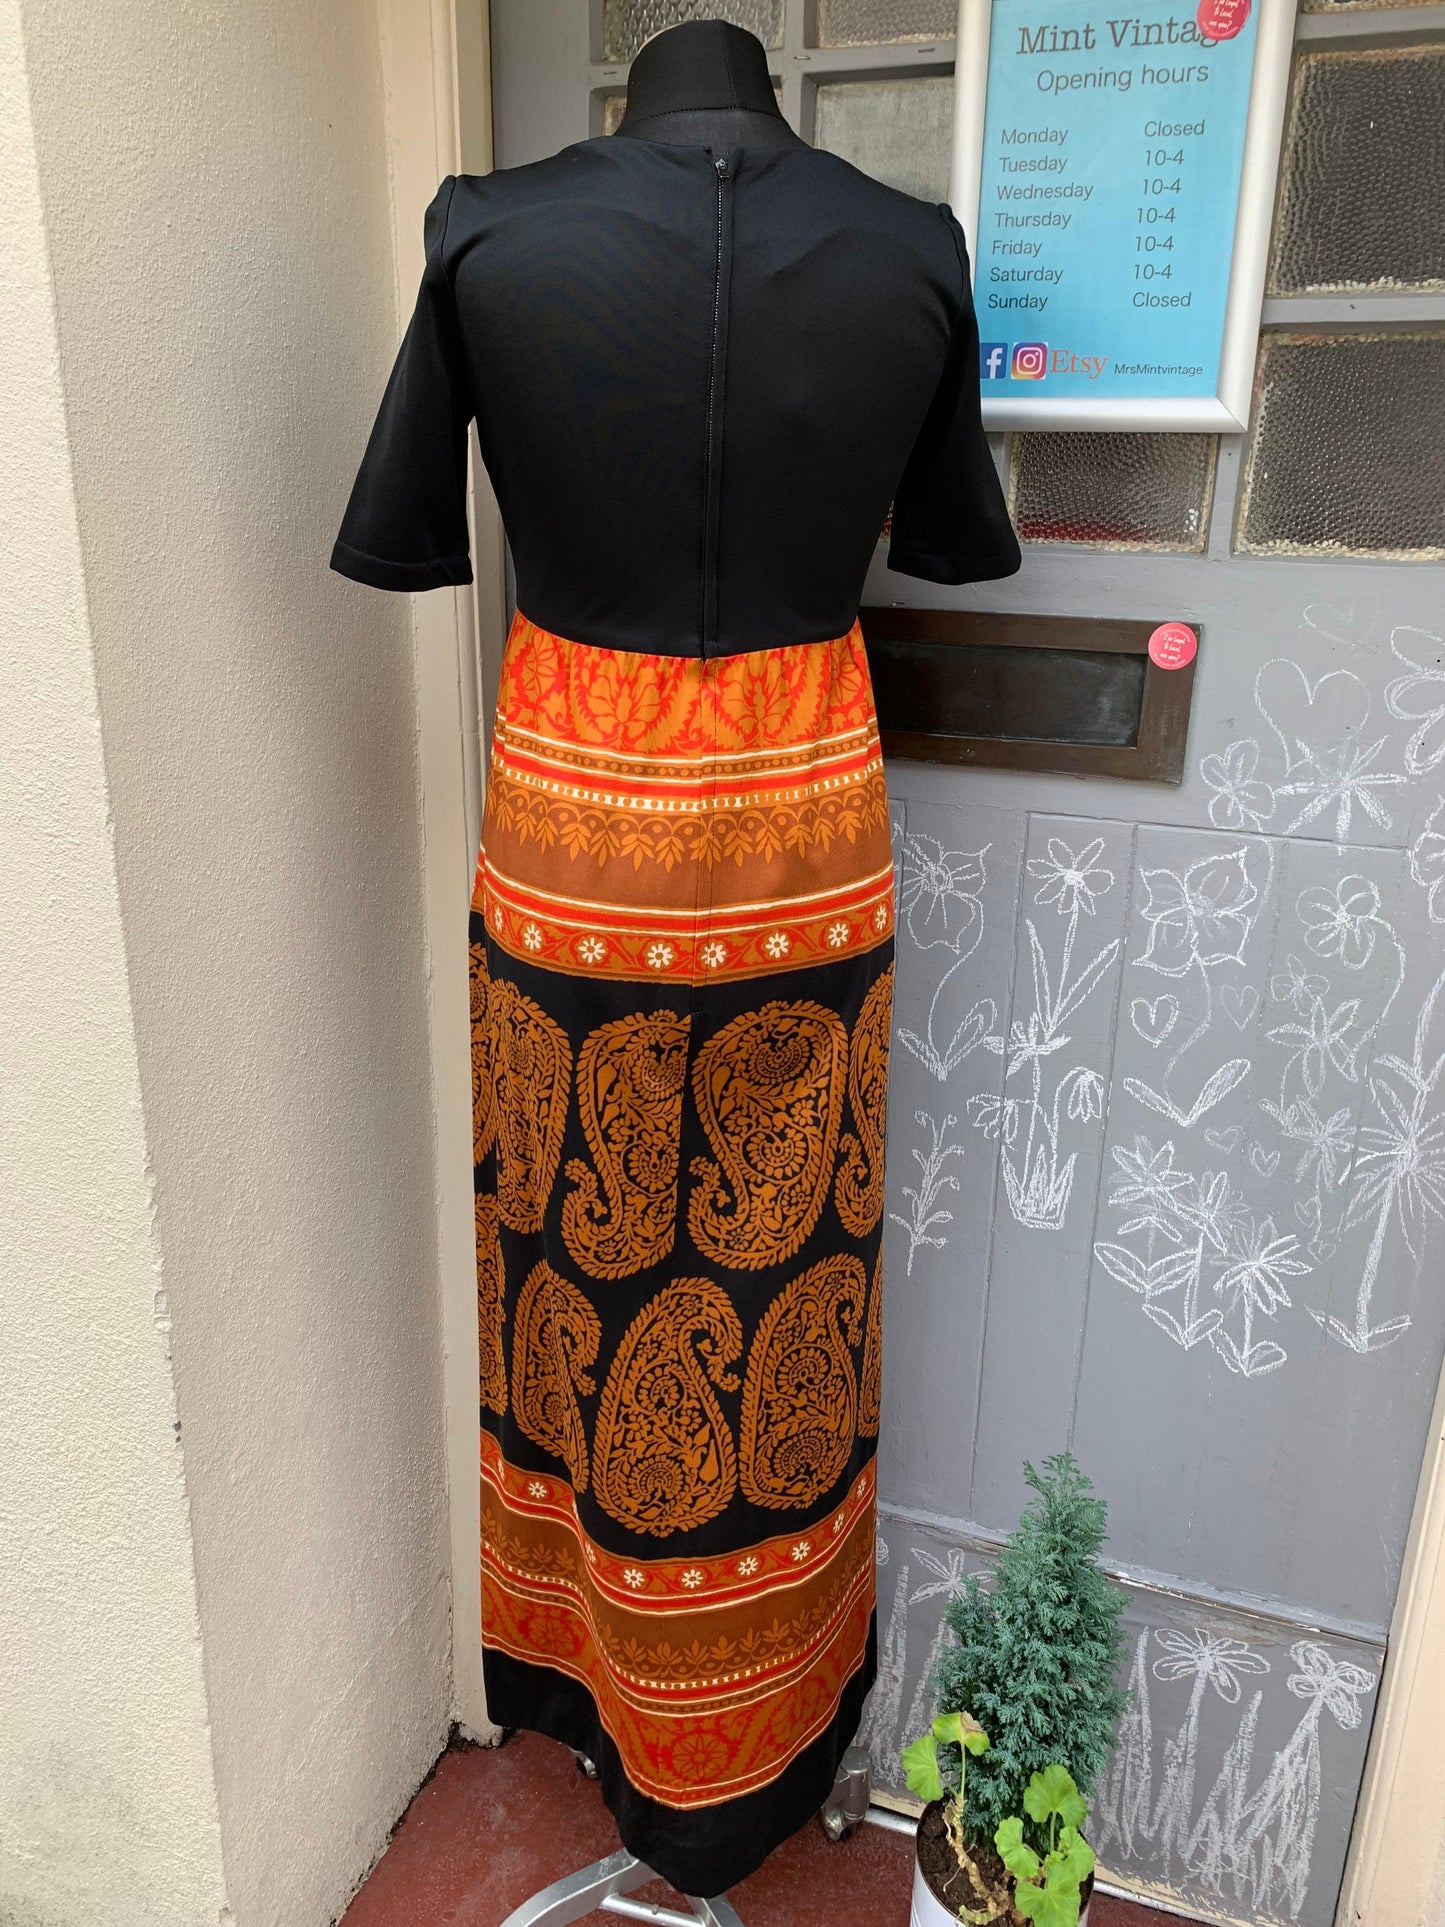 Vintage 1970’s boho style maxi dress by polly Peck